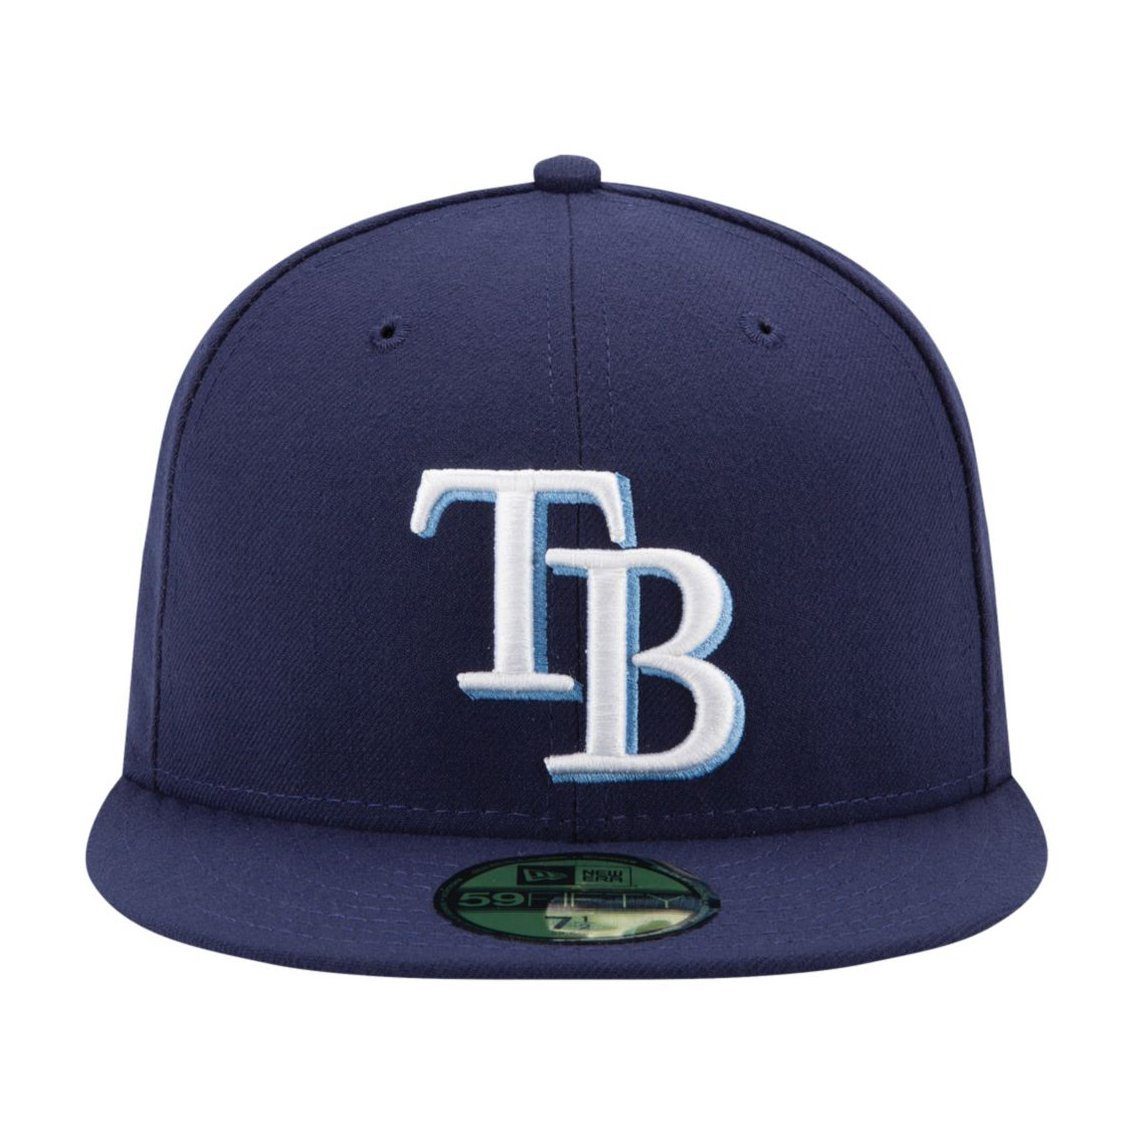 Tampa Bay Fitted New 59Fifty Era AUTHENTIC ONFIELD Rays Cap